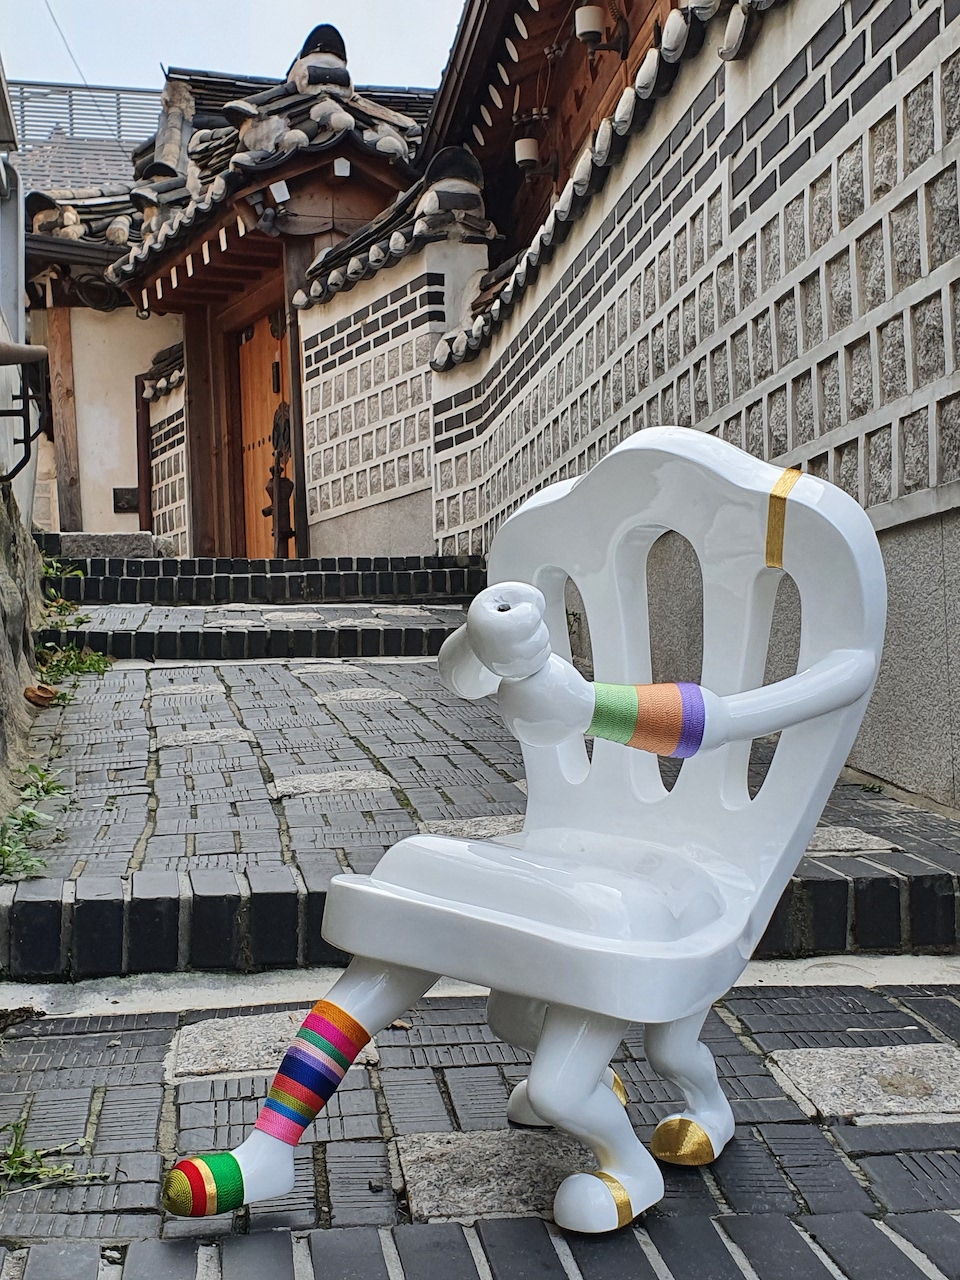 Doha's installation artwork, a chair-like artwork placing at the center of a road with Korean-style building background